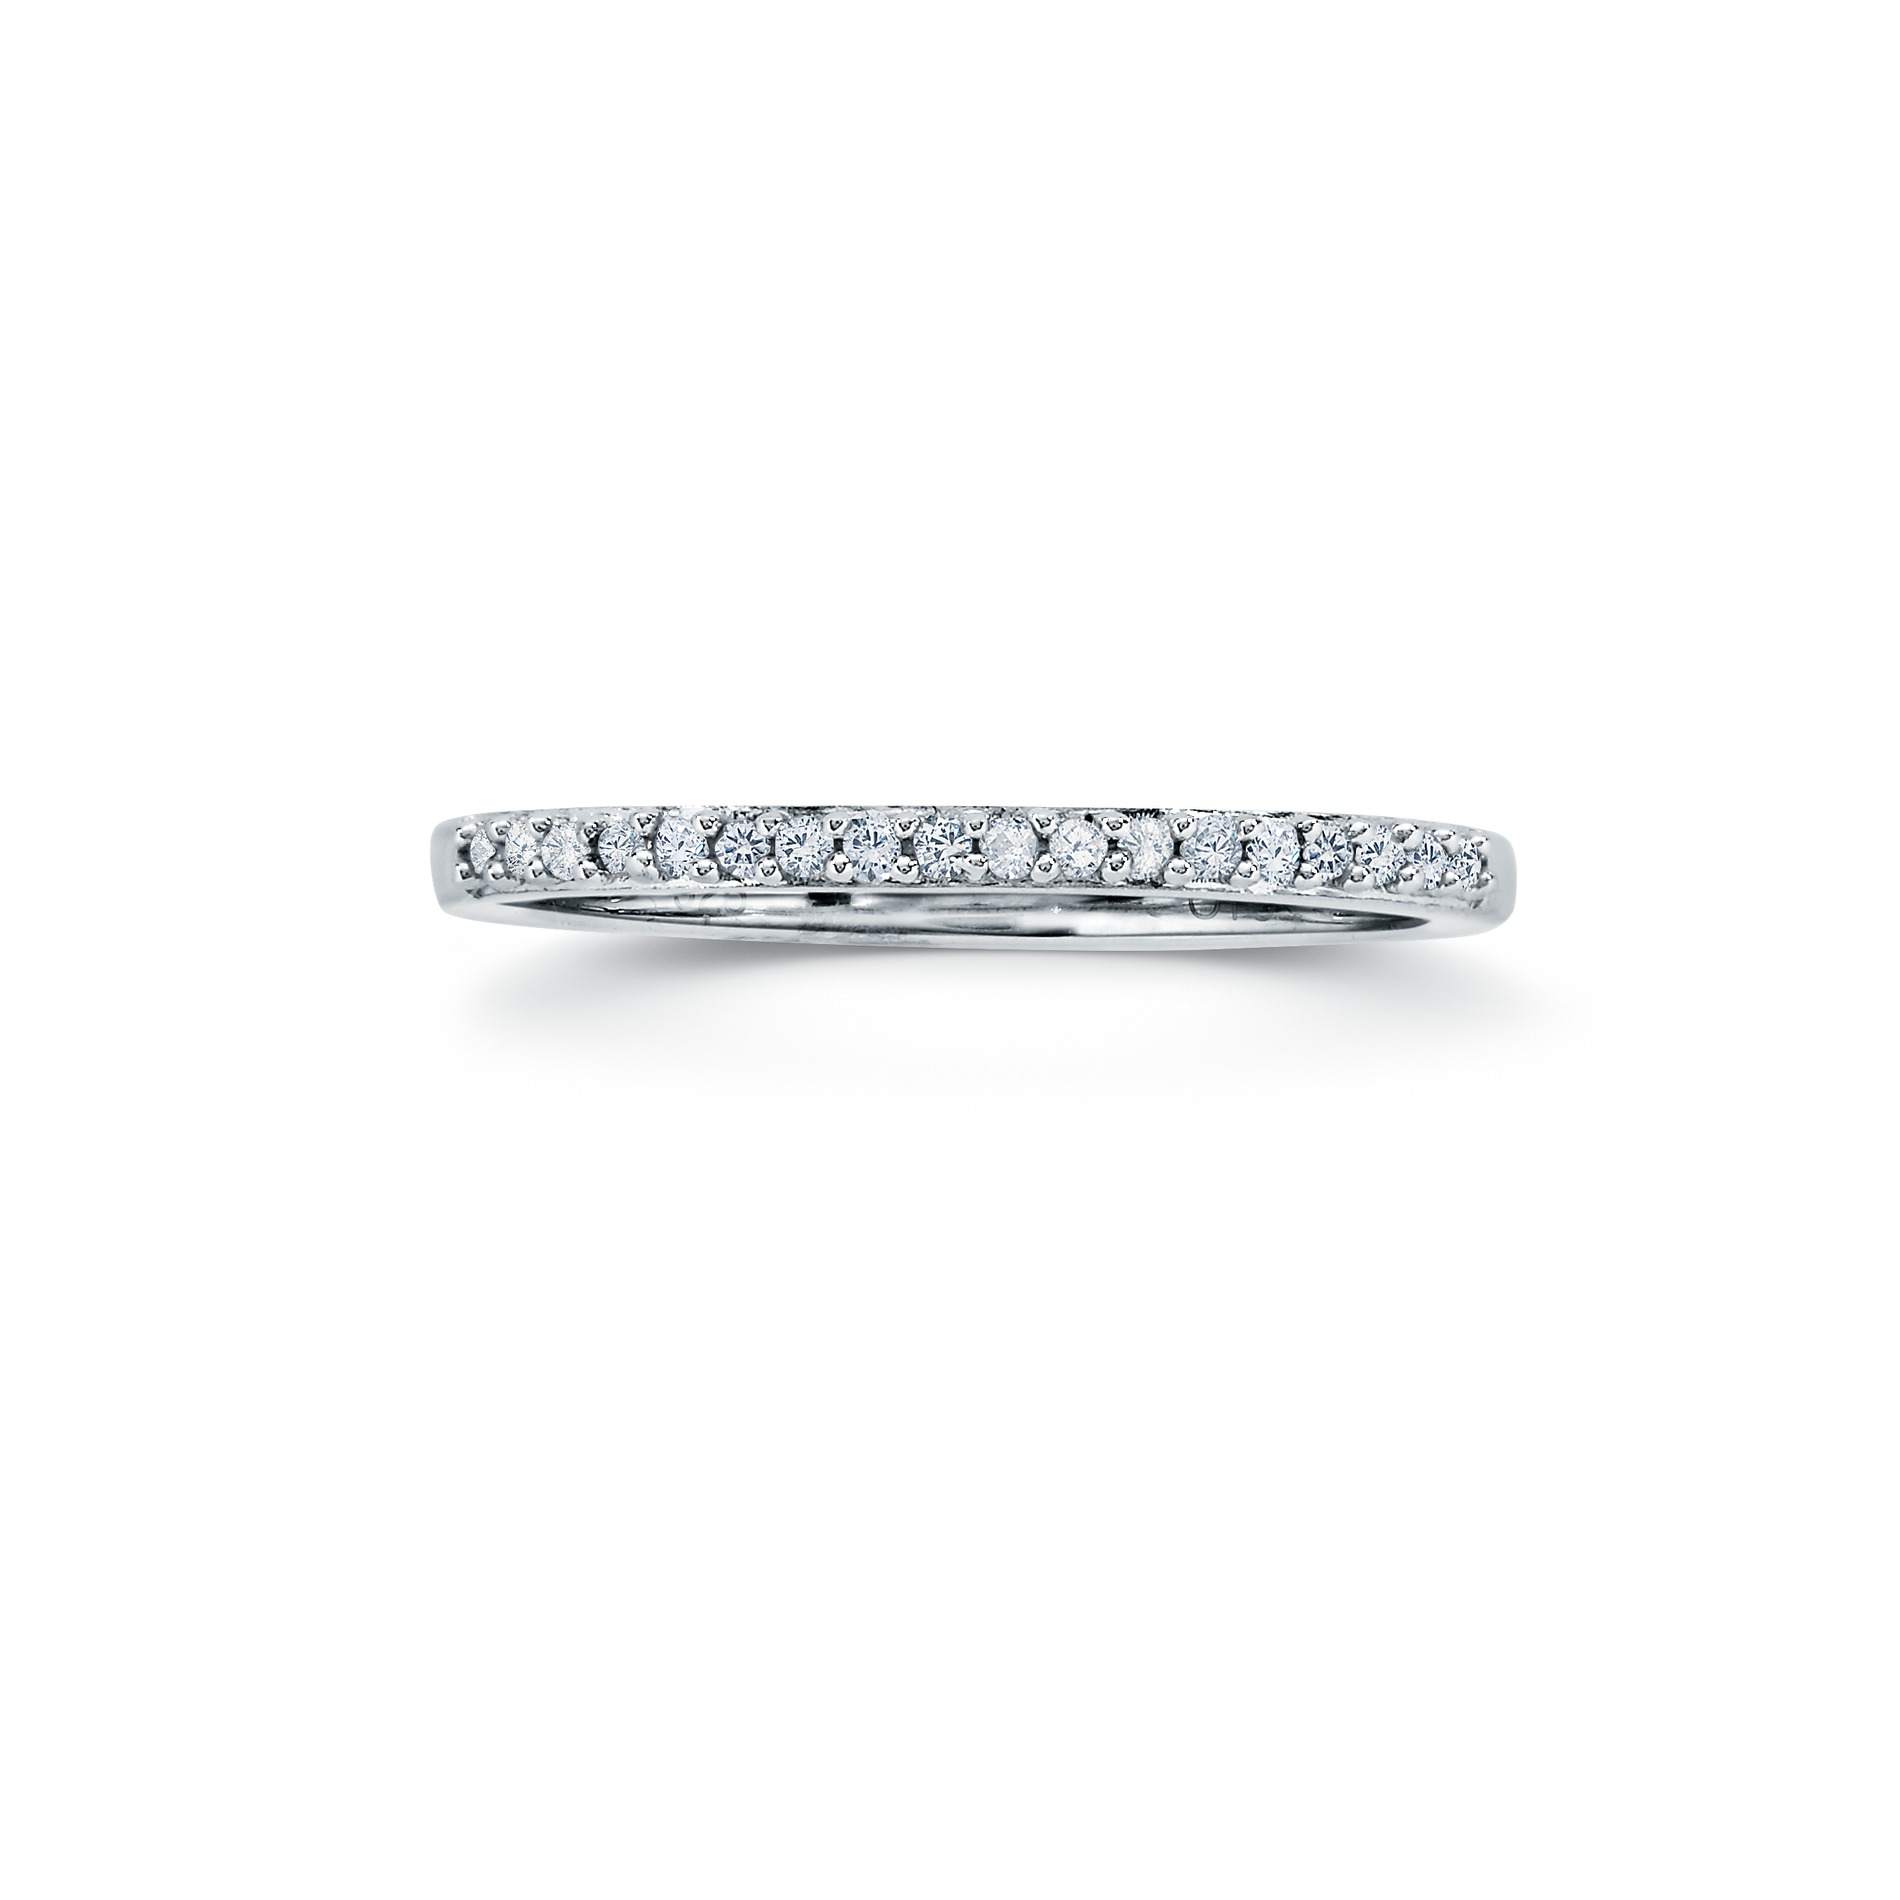 Sterling Silver 1/10 CTTW Diamond Pave Stackable Ring - Size 7 Only